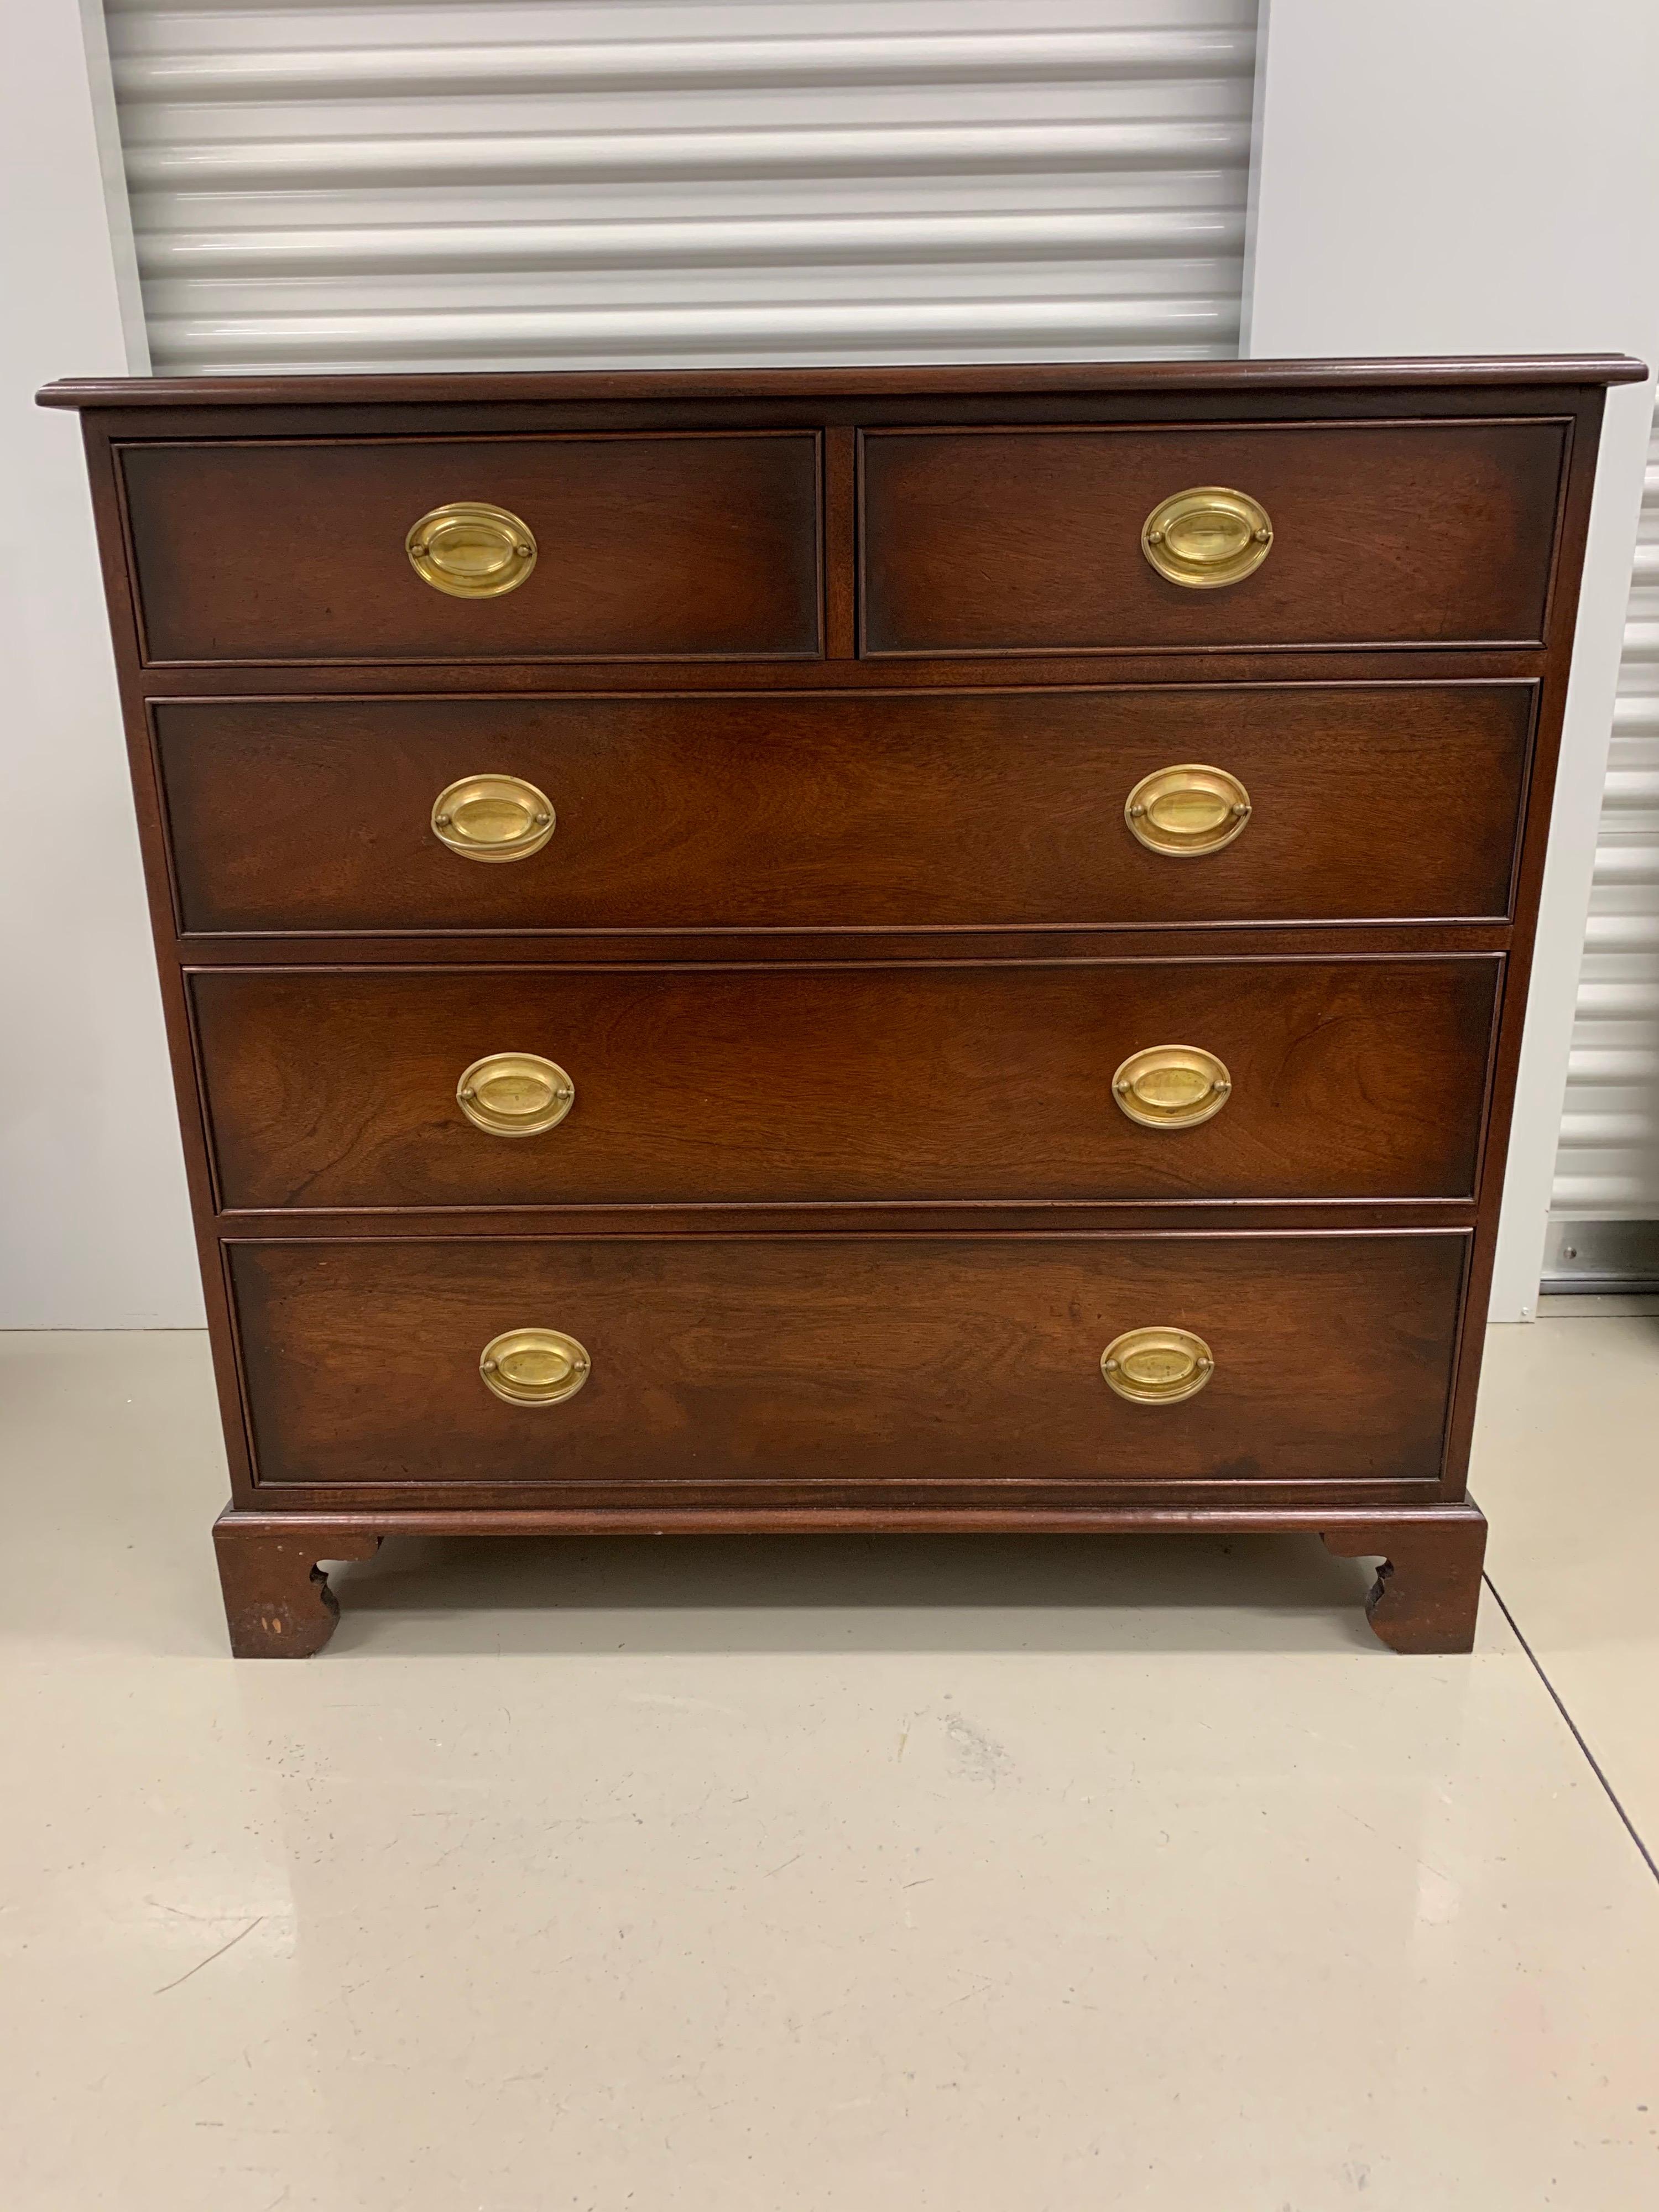 Elegant mahogany chest of drawers with original brass oval hardware. There are five drawers in
all and great Federal style lines. See dimensions, not too big and not too small.